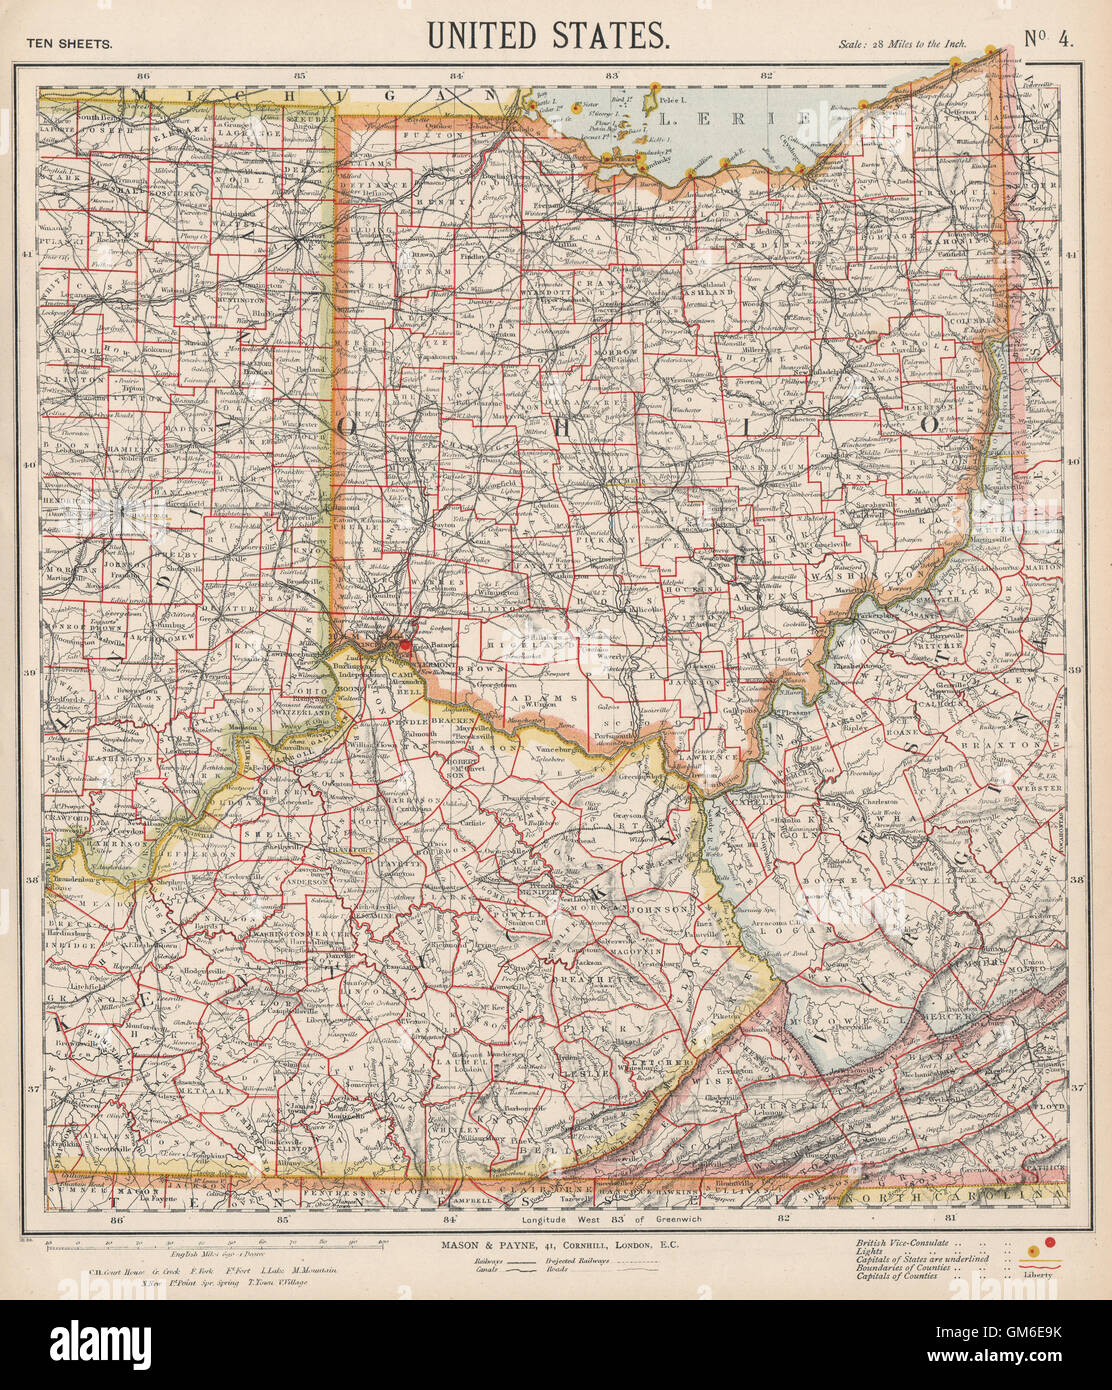 USA. Ohio with parts of Kentucky, Virginia & Indiana. Railroads. LETTS, 1889 map Stock Photo